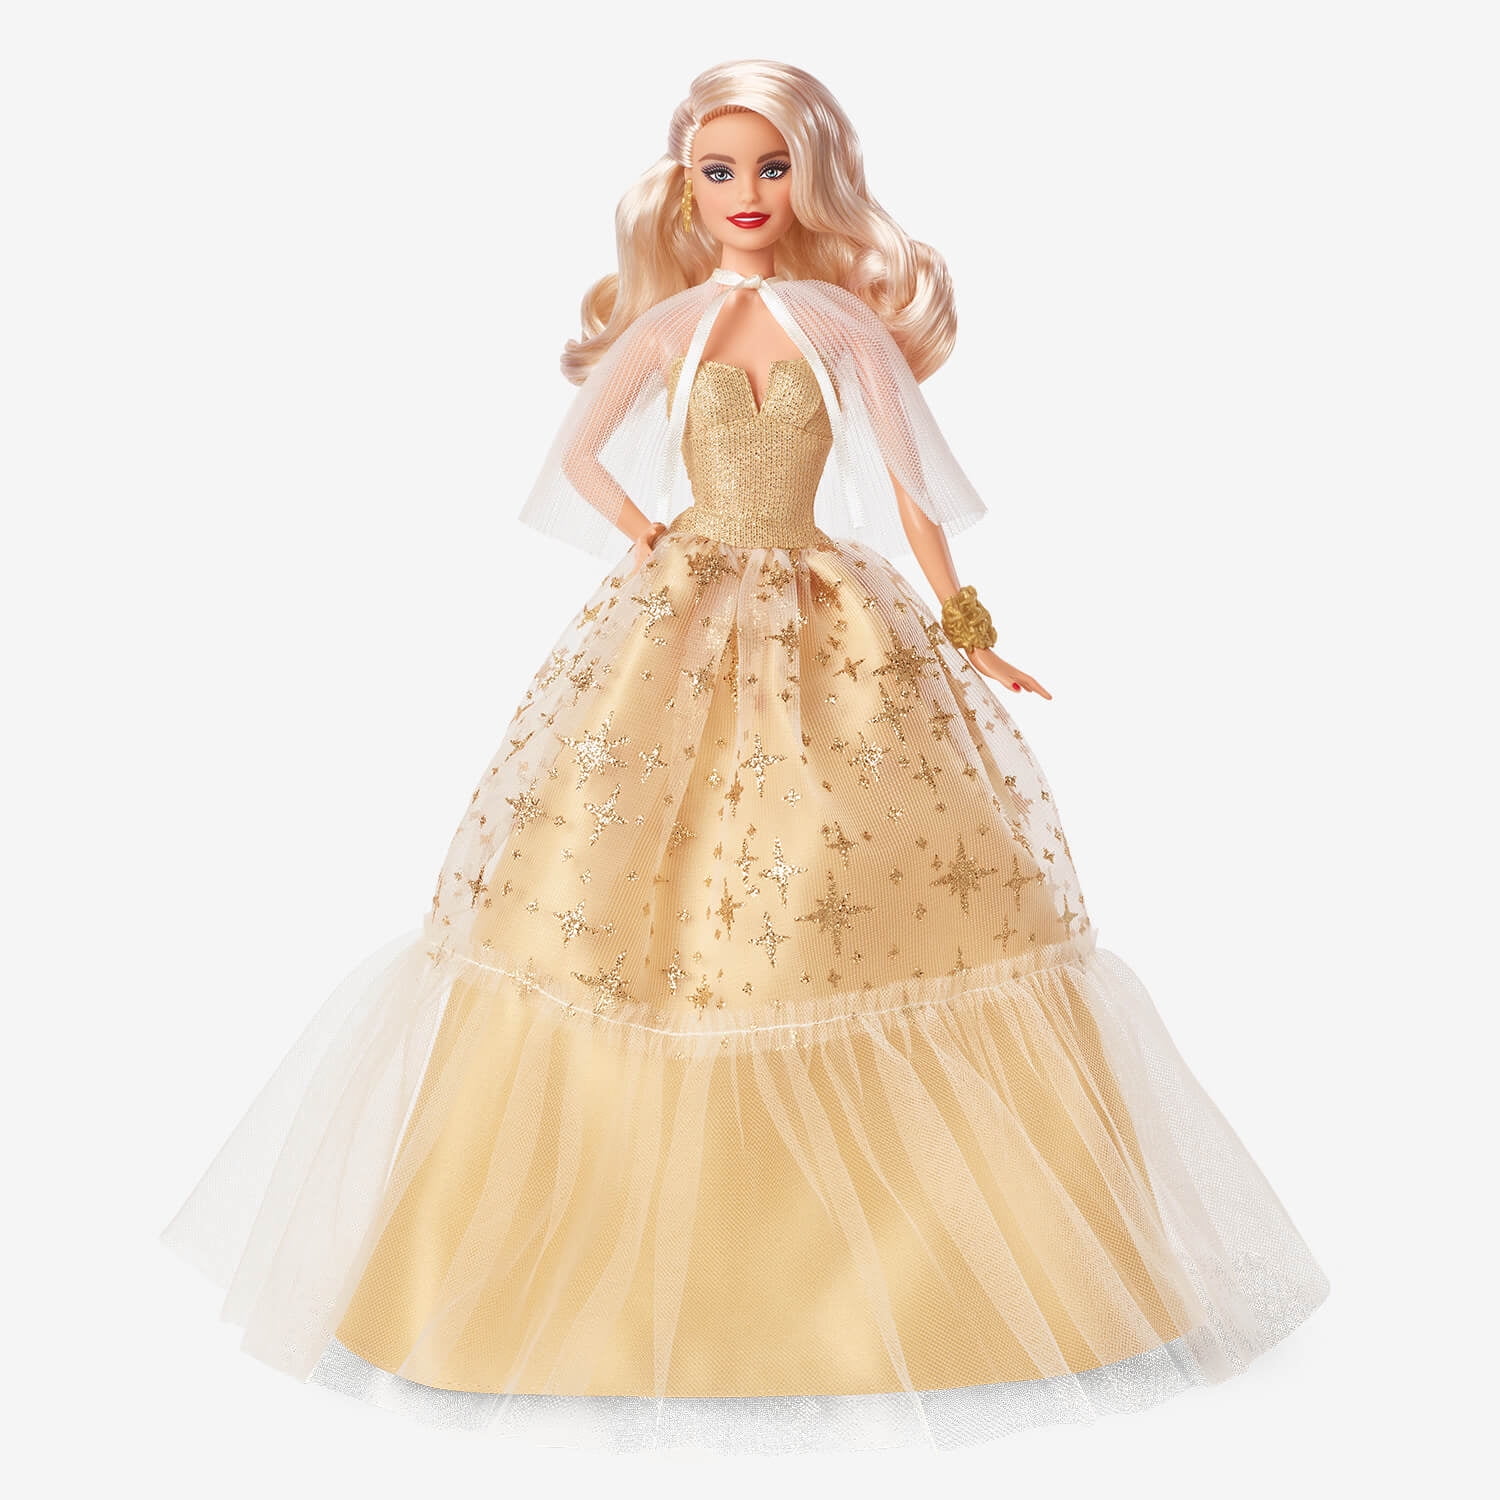 2023 HOLIDAY BARBIE - The Toy Book